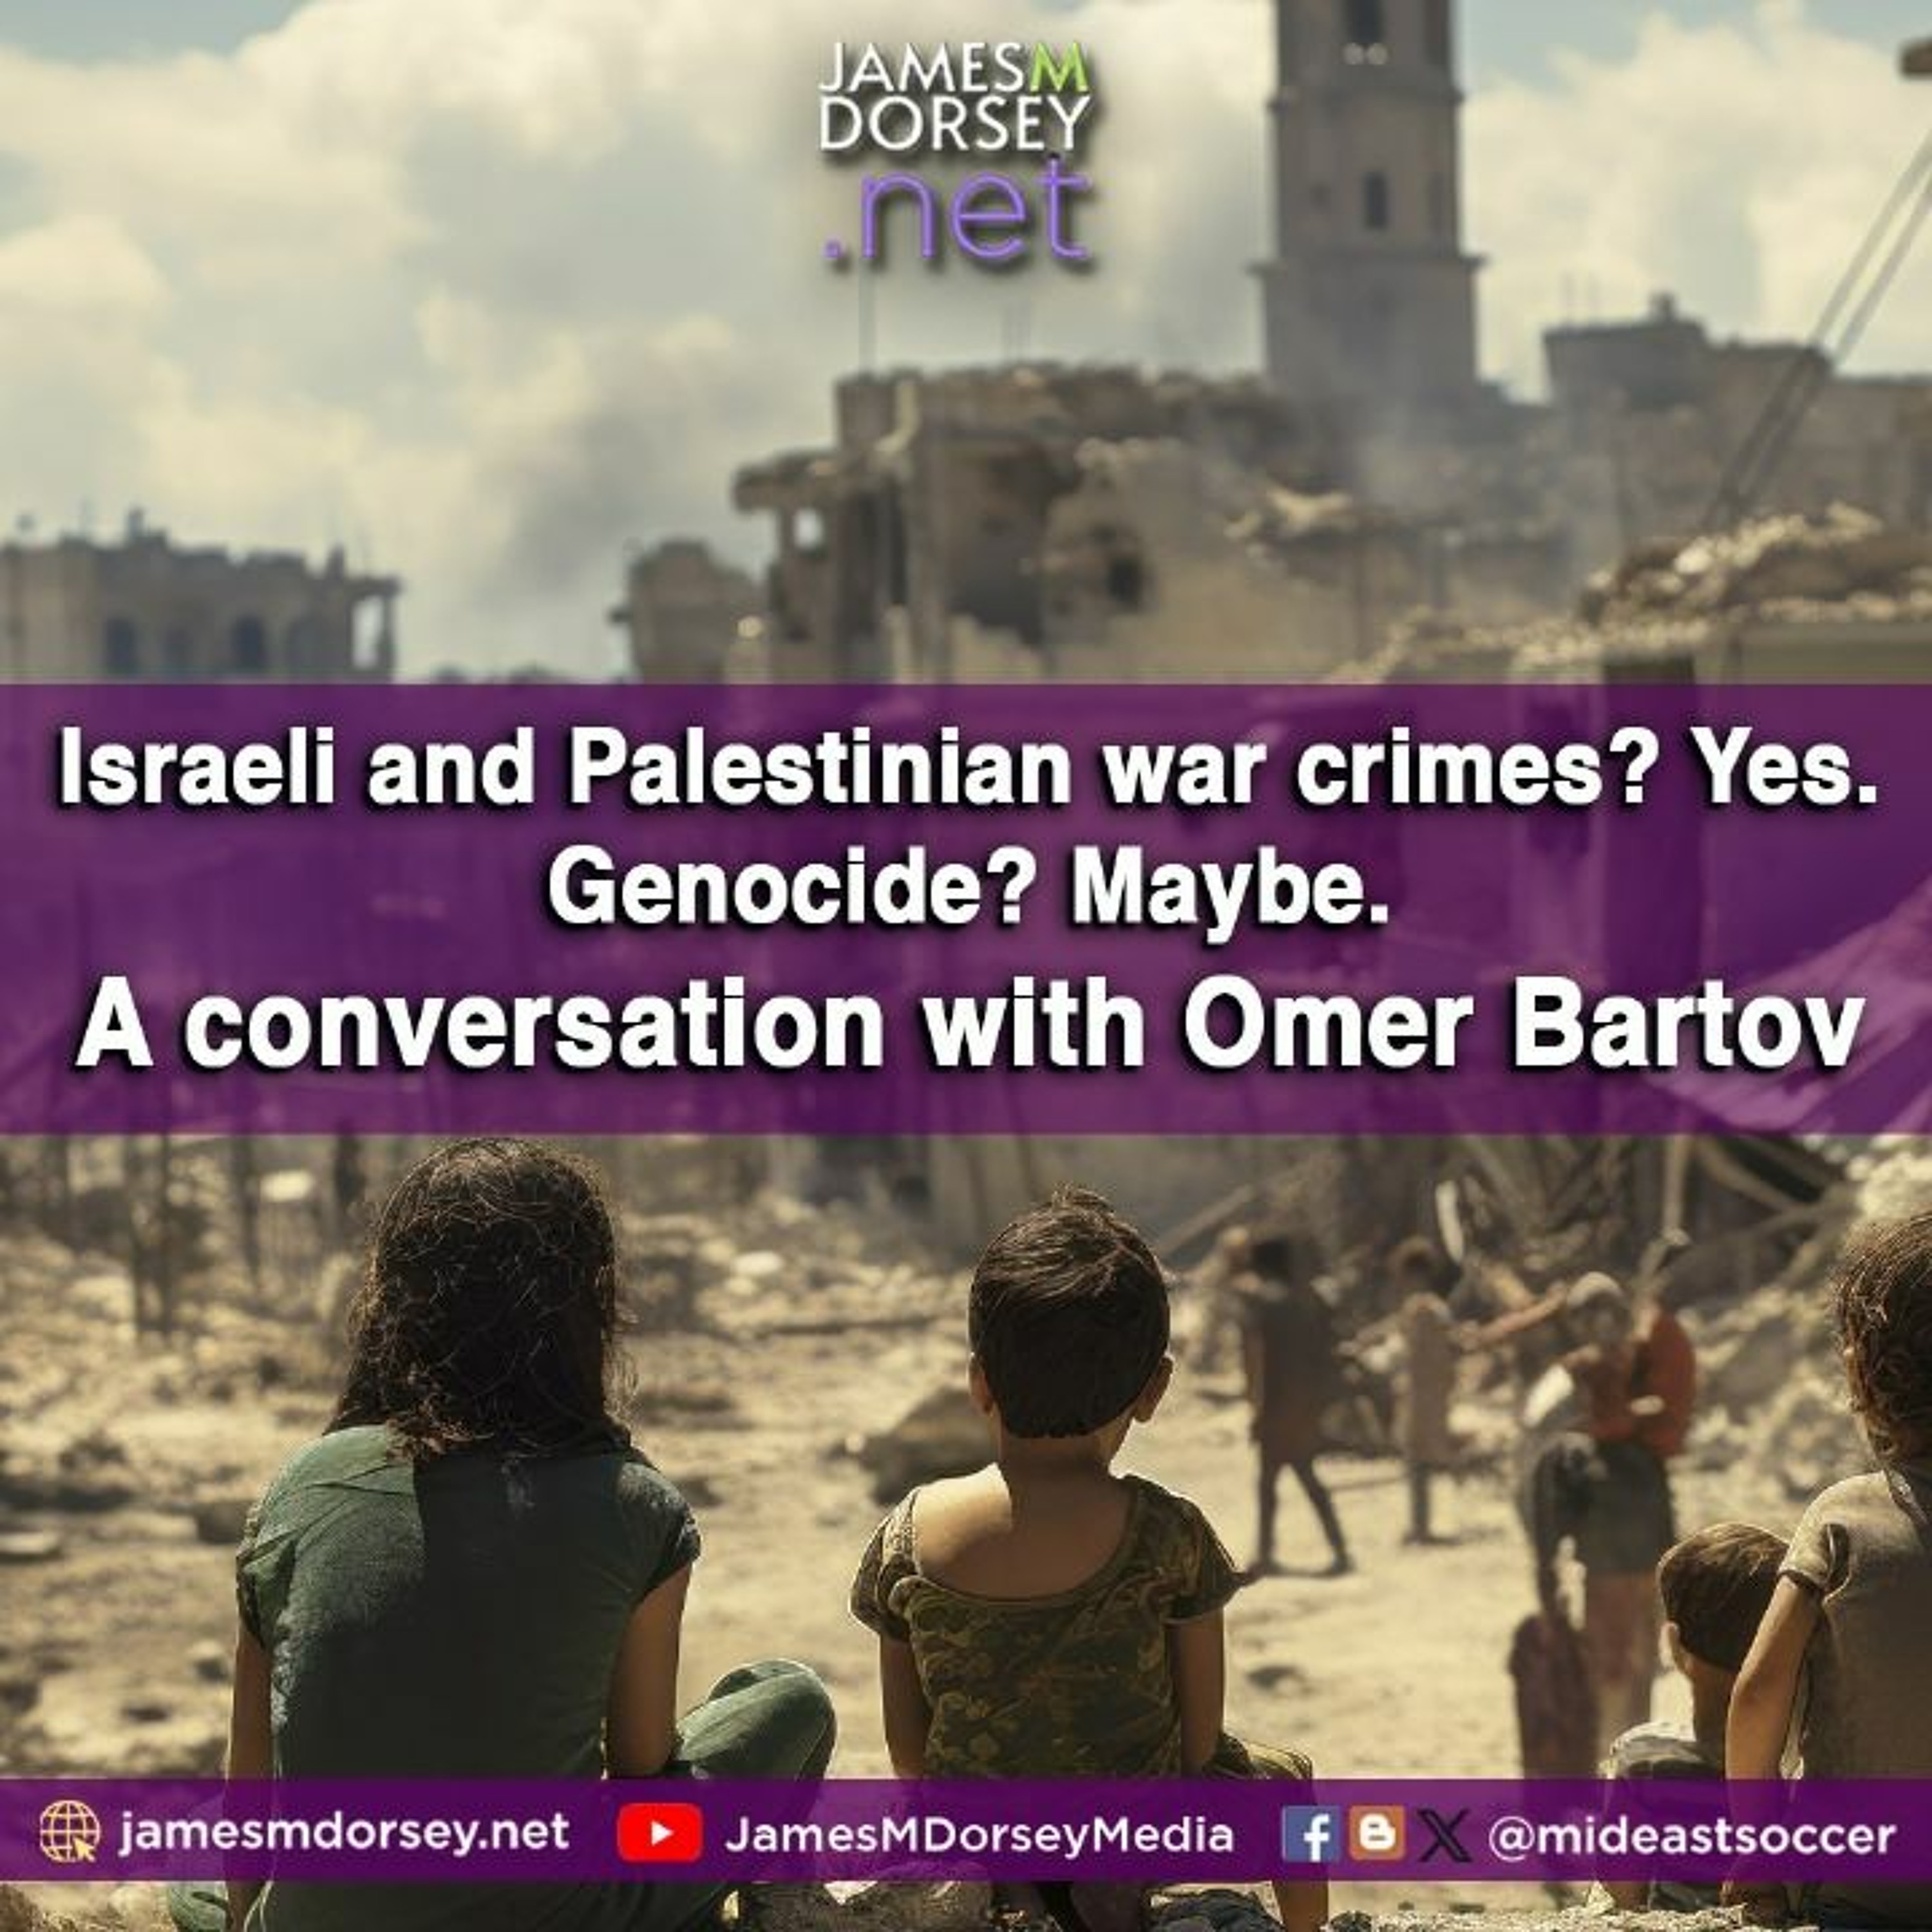 Israeli And Palestinian War Crimes - A Conversation With Omer Bartov